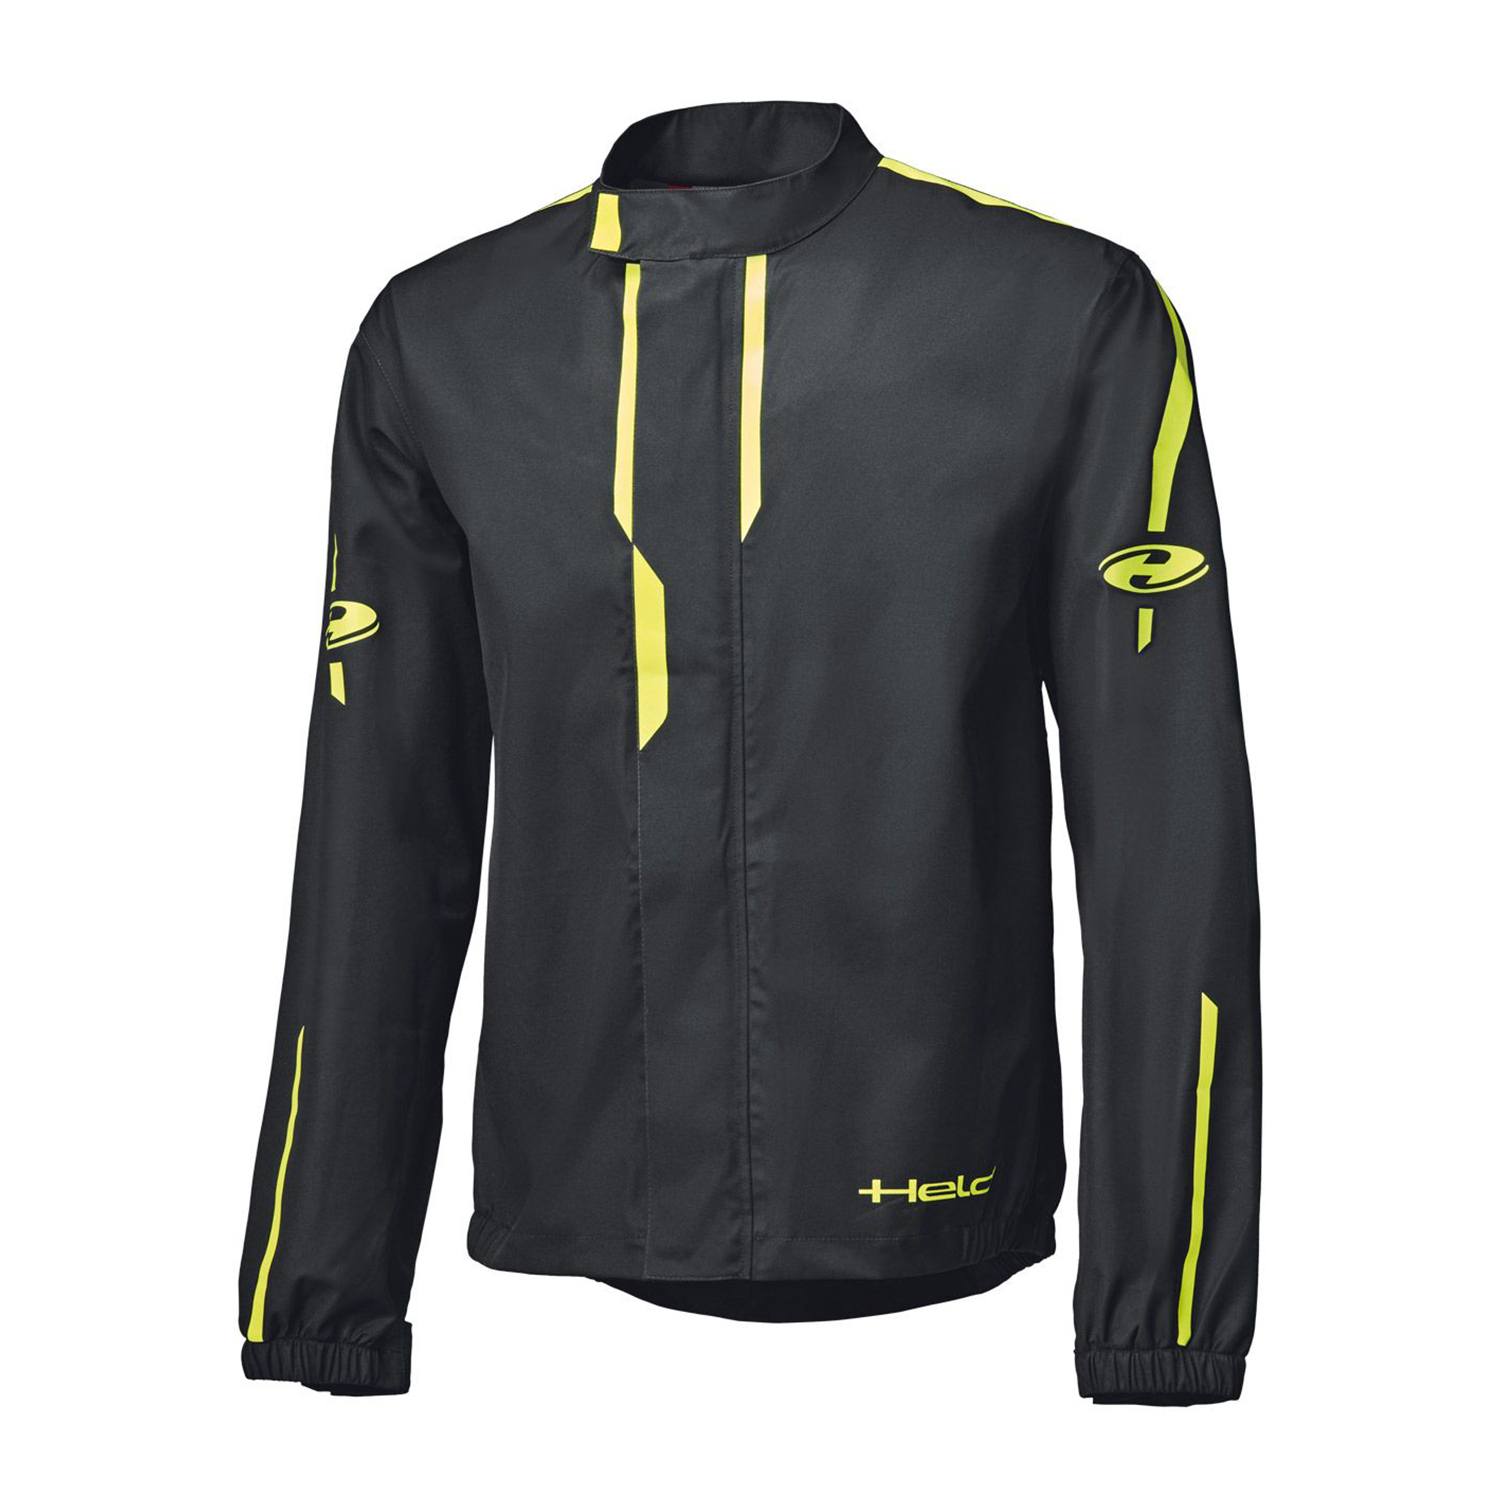 Held Rainstorm Top Black-Fluorescent Yellow - Available in Various Sizes